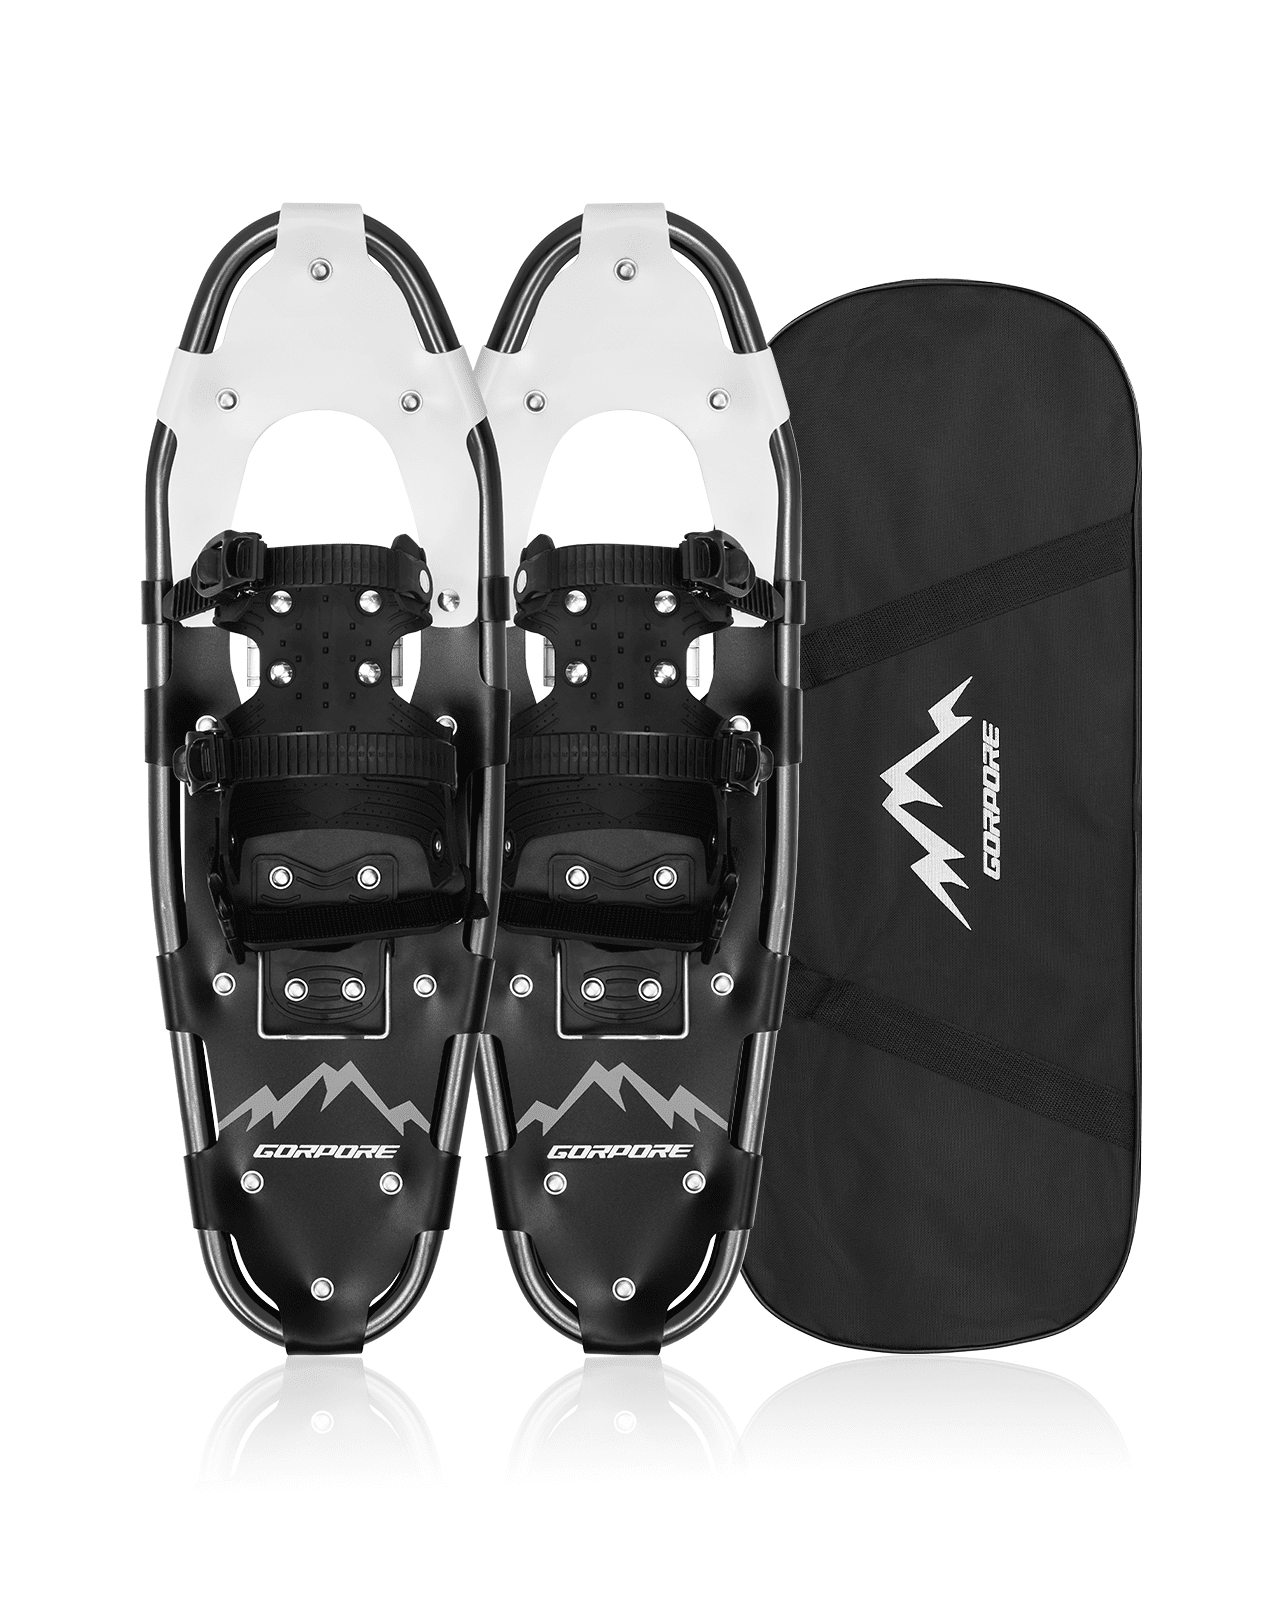 Light Weight Aluminum Alloy Terrain Snowshoes with Trekking Poles and Carrying Tote Bag 14/21/27 Gpeng 3-in-1 Xtreme Lightweight Terrain Snow Shoes for Women Men Youth Kids 